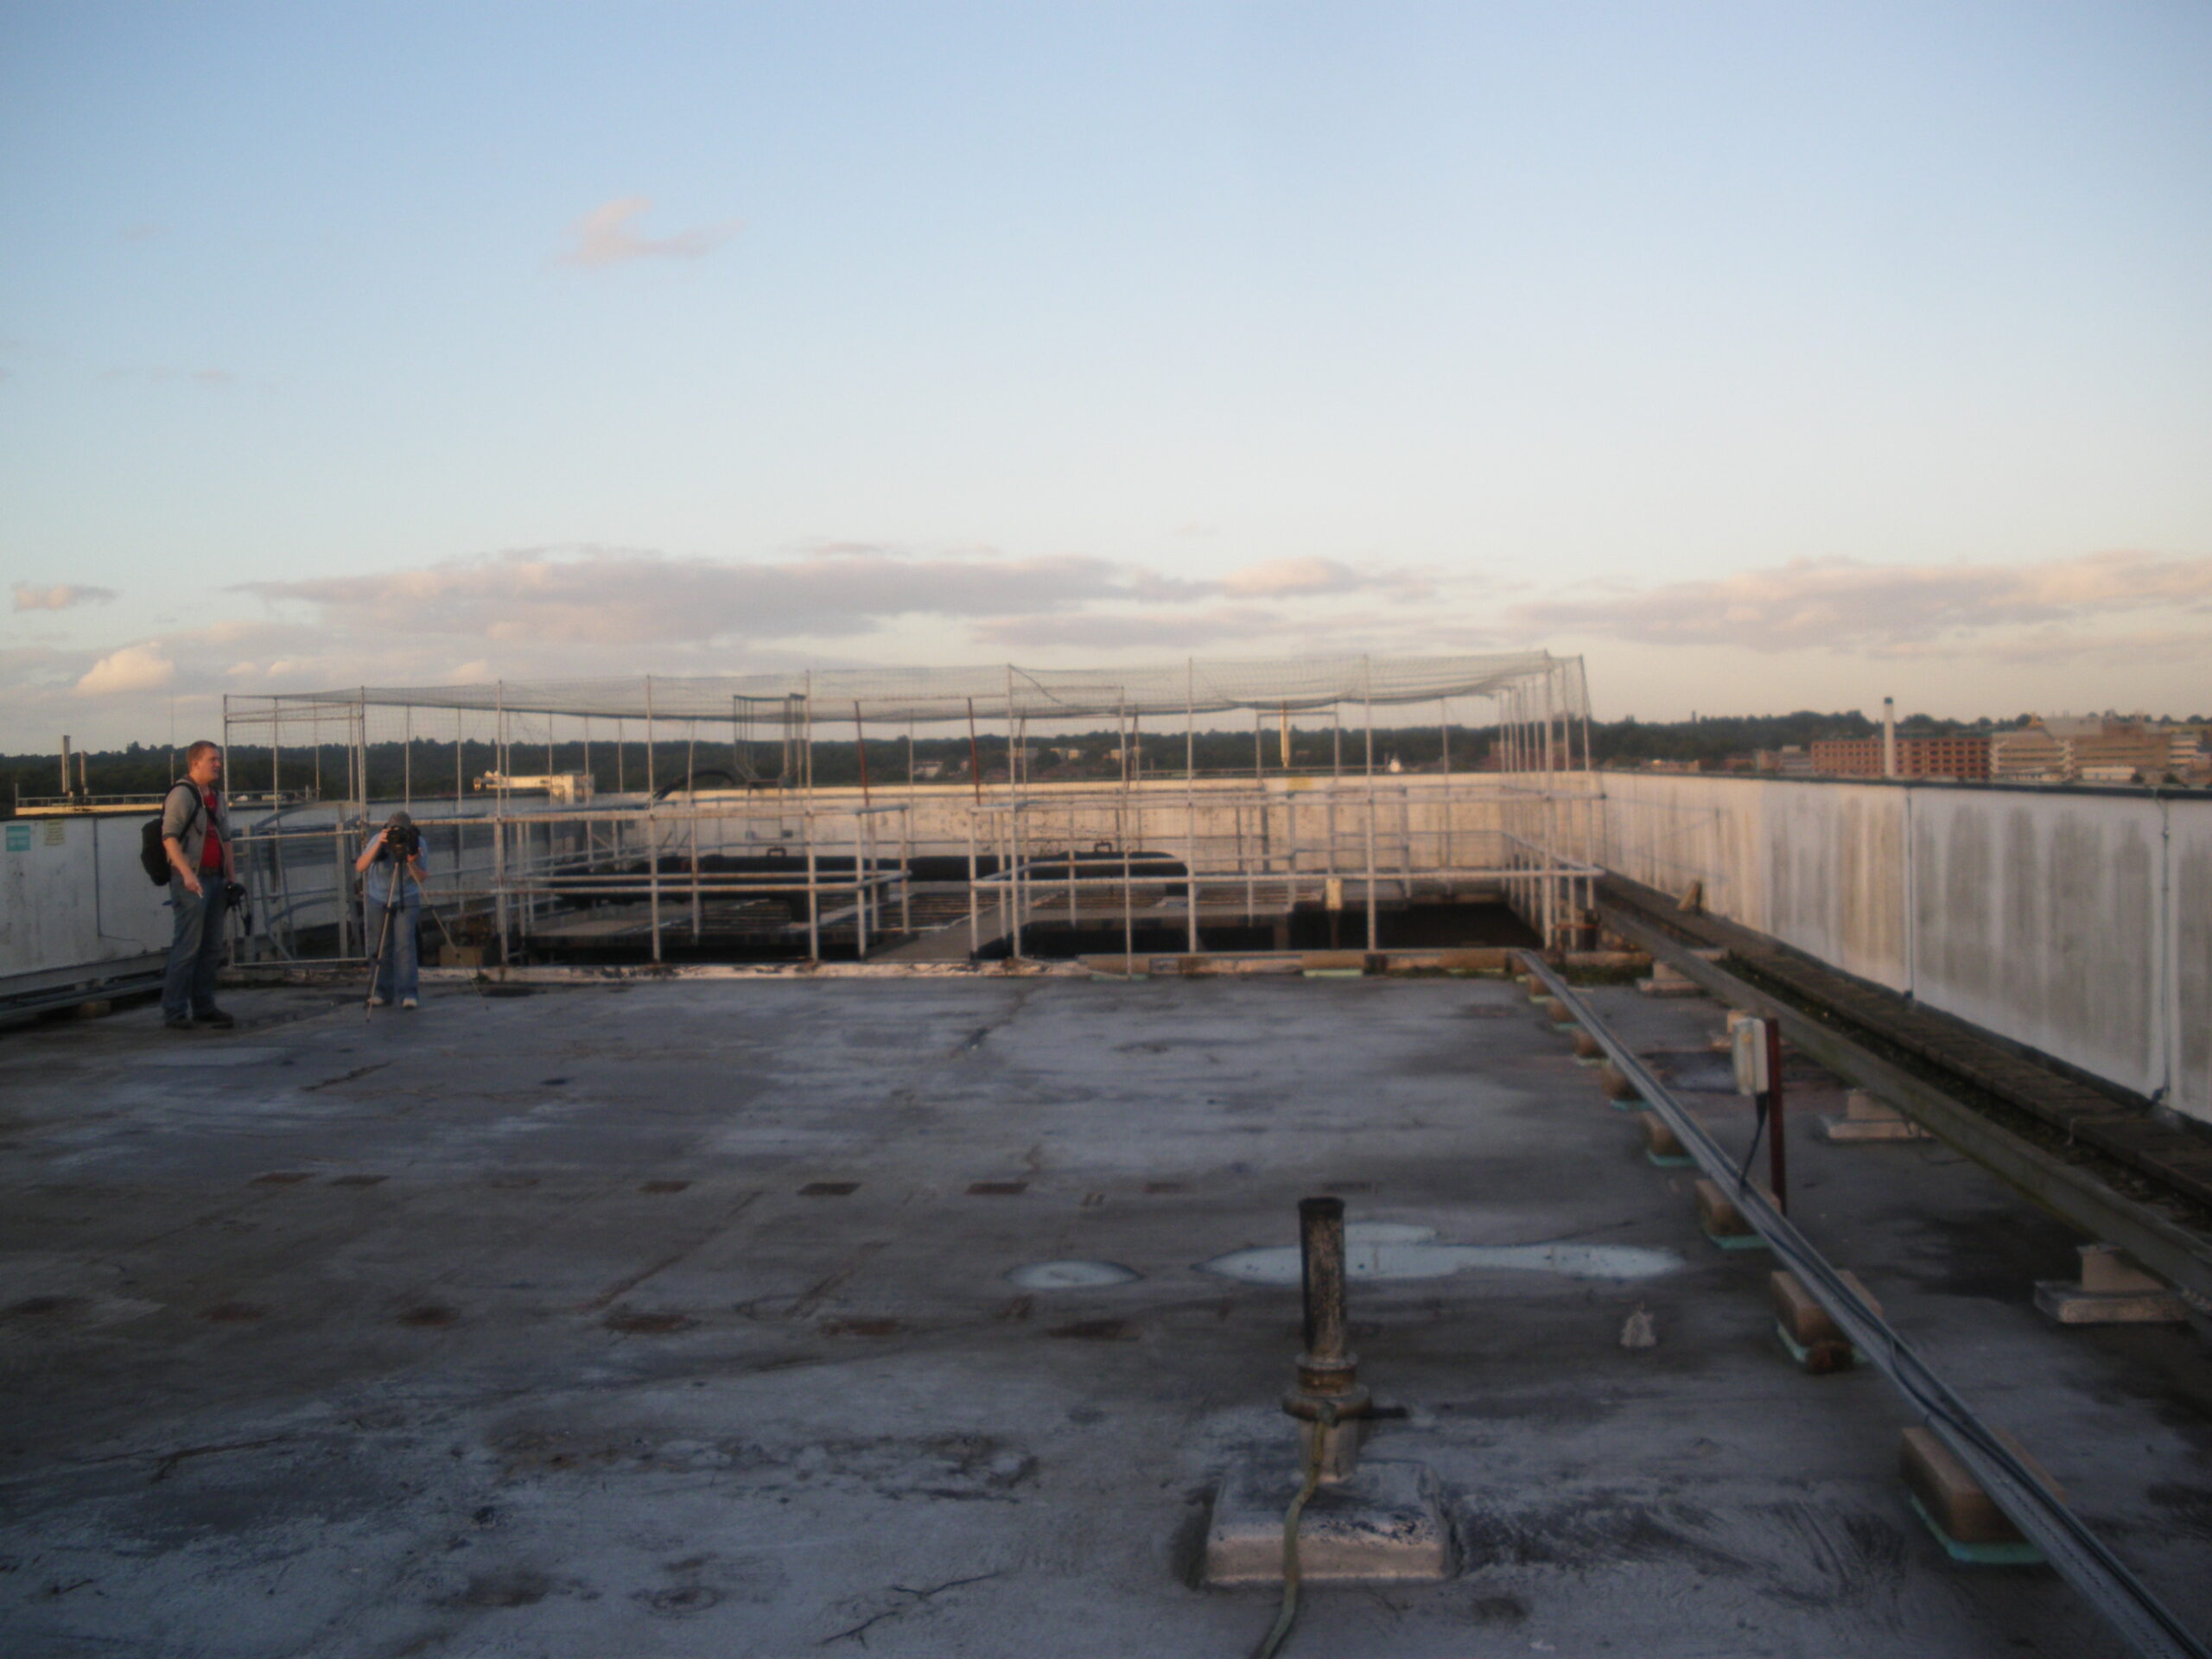 F core penthouse roof, facing cooling towers, 13 Sep 2011